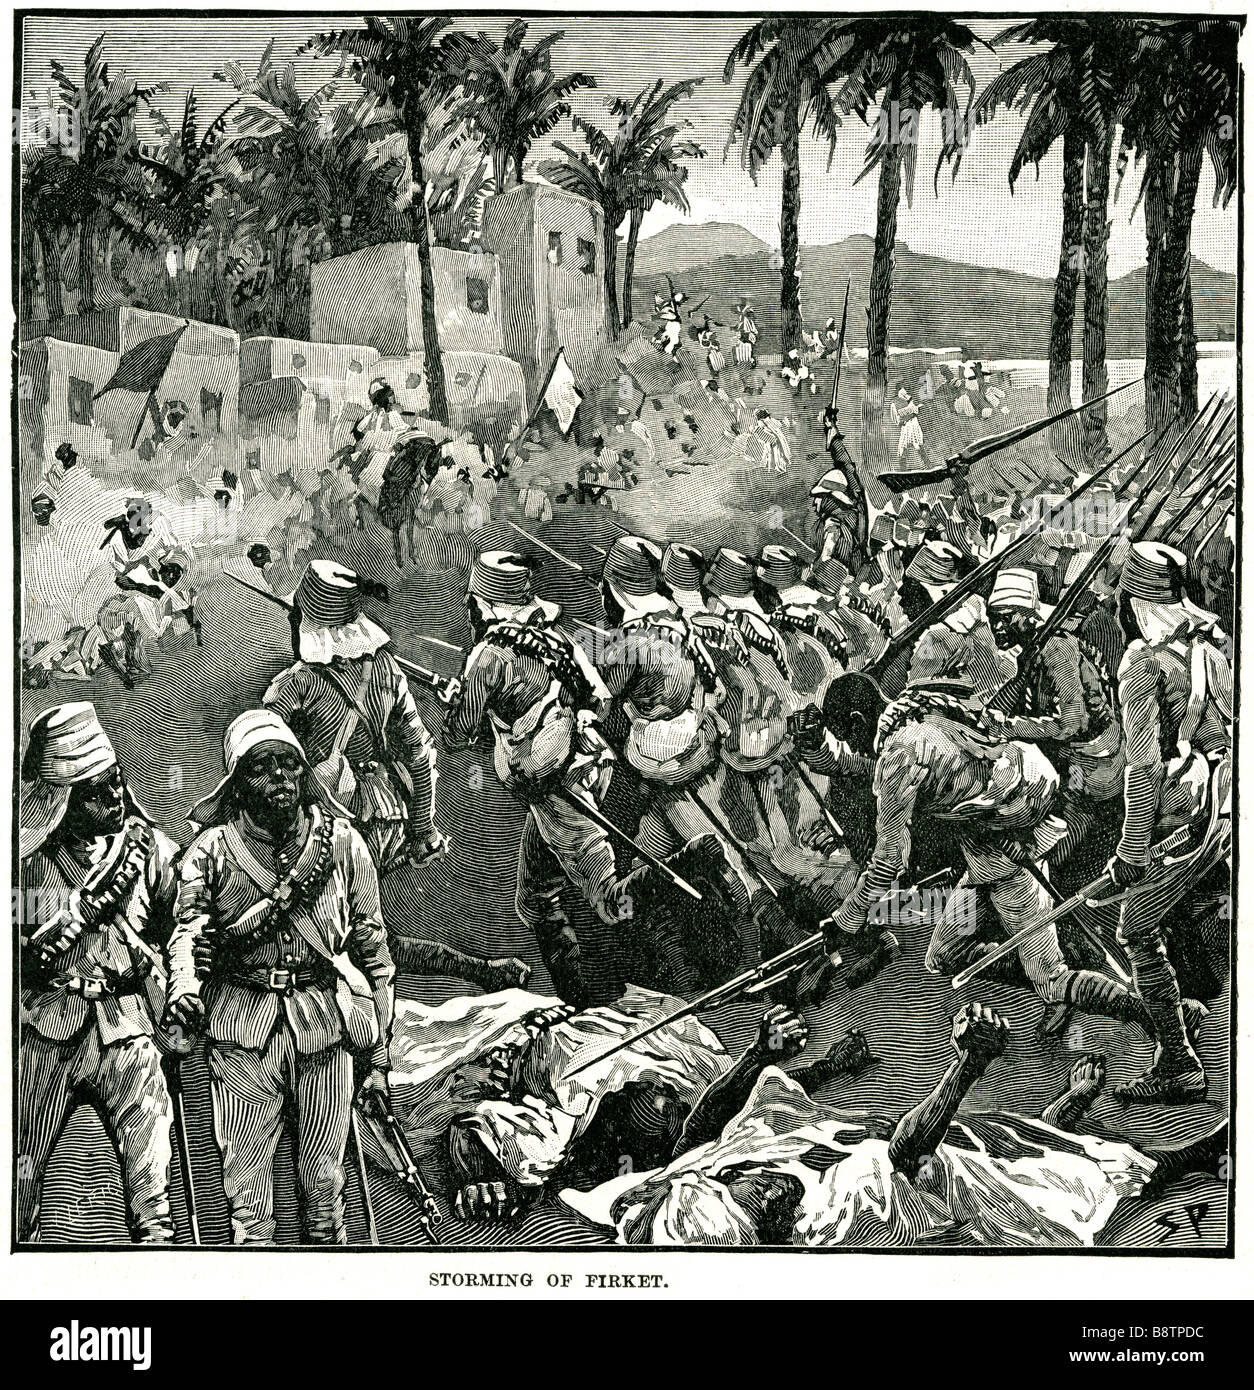 storming of firket The Battle of Ferkeh (or Firket) occurred during the Mahdist War when an army of the Mahdist Sudanese was sur Stock Photo